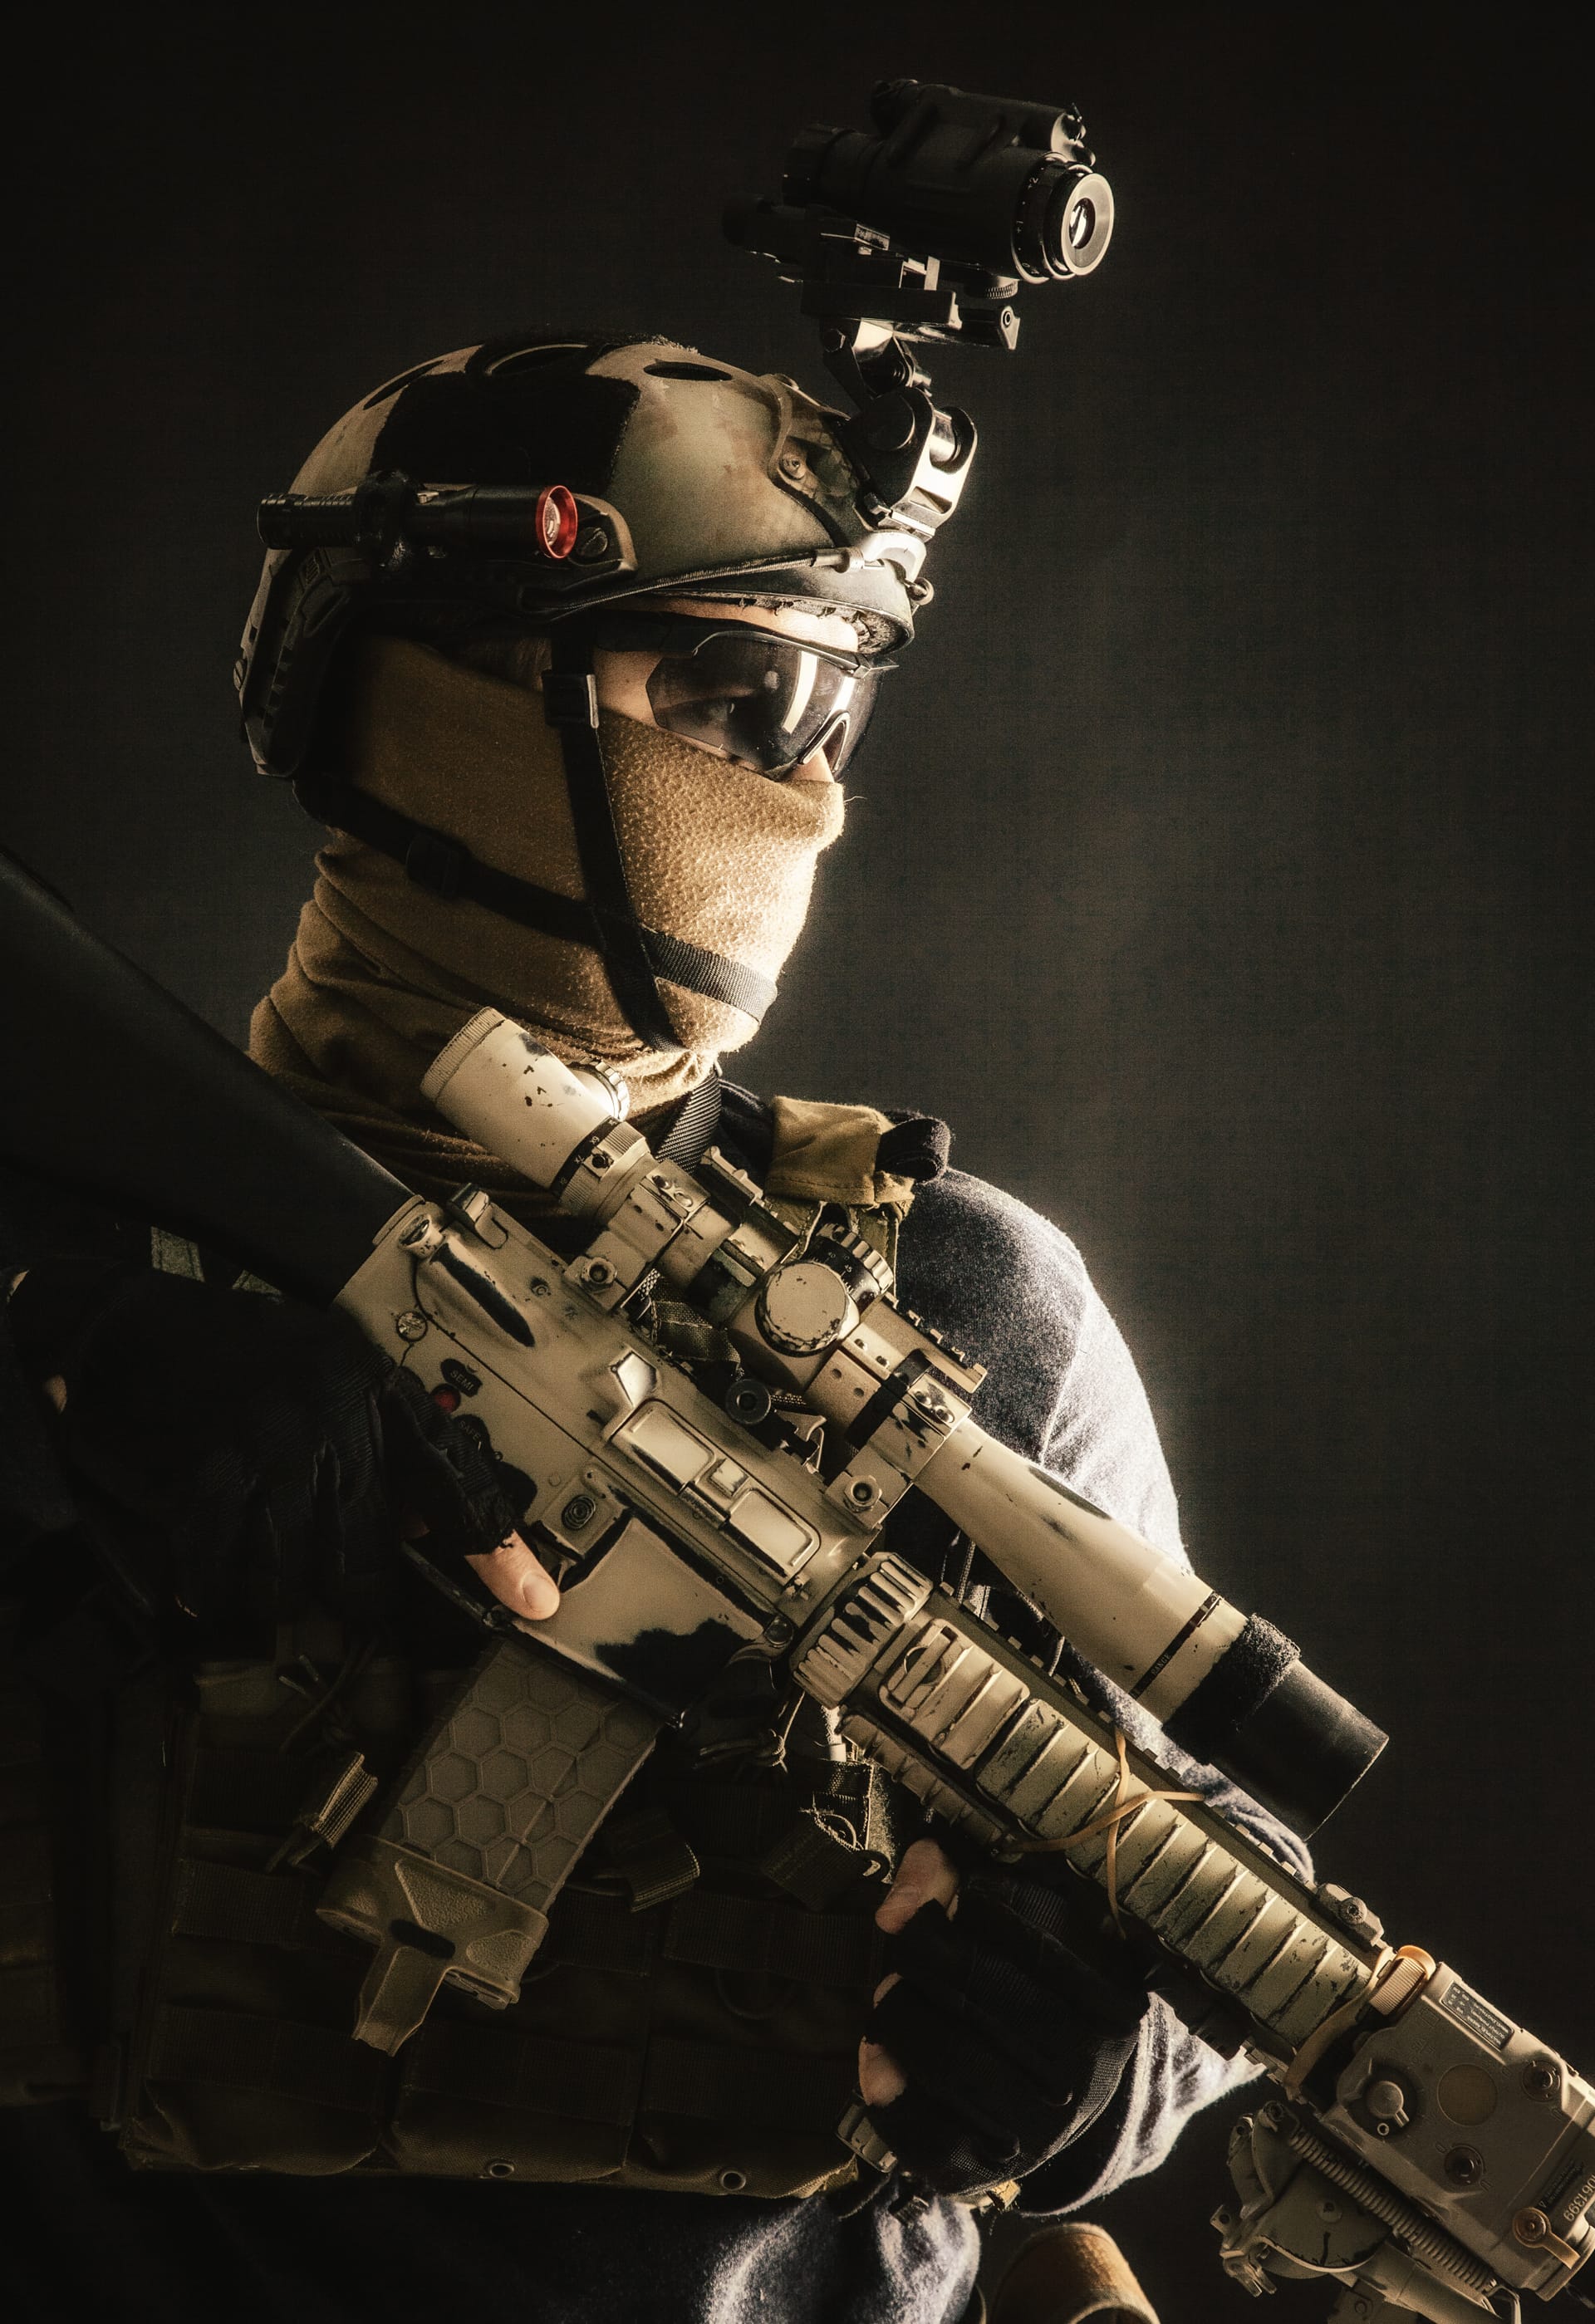 Soldier wearing helmet with thermal imager hiding face mask armed rifle